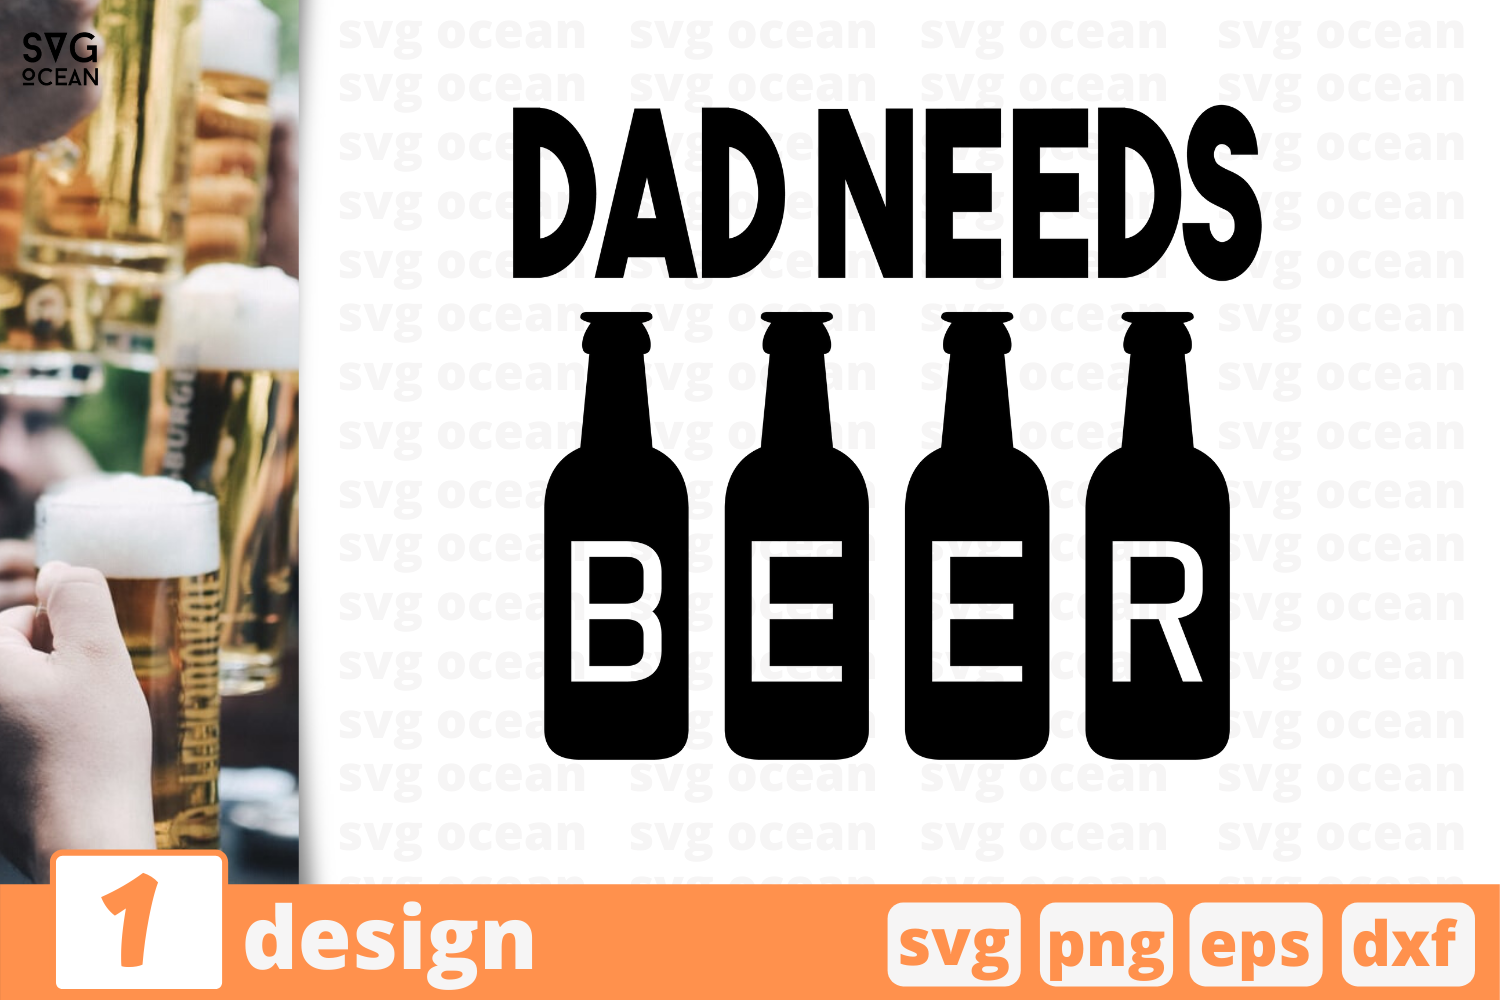 Download 1 Dad Needs Beer Svg Bundle Father S Day Quotes Cricut Svg By Svgocean Thehungryjpeg Com